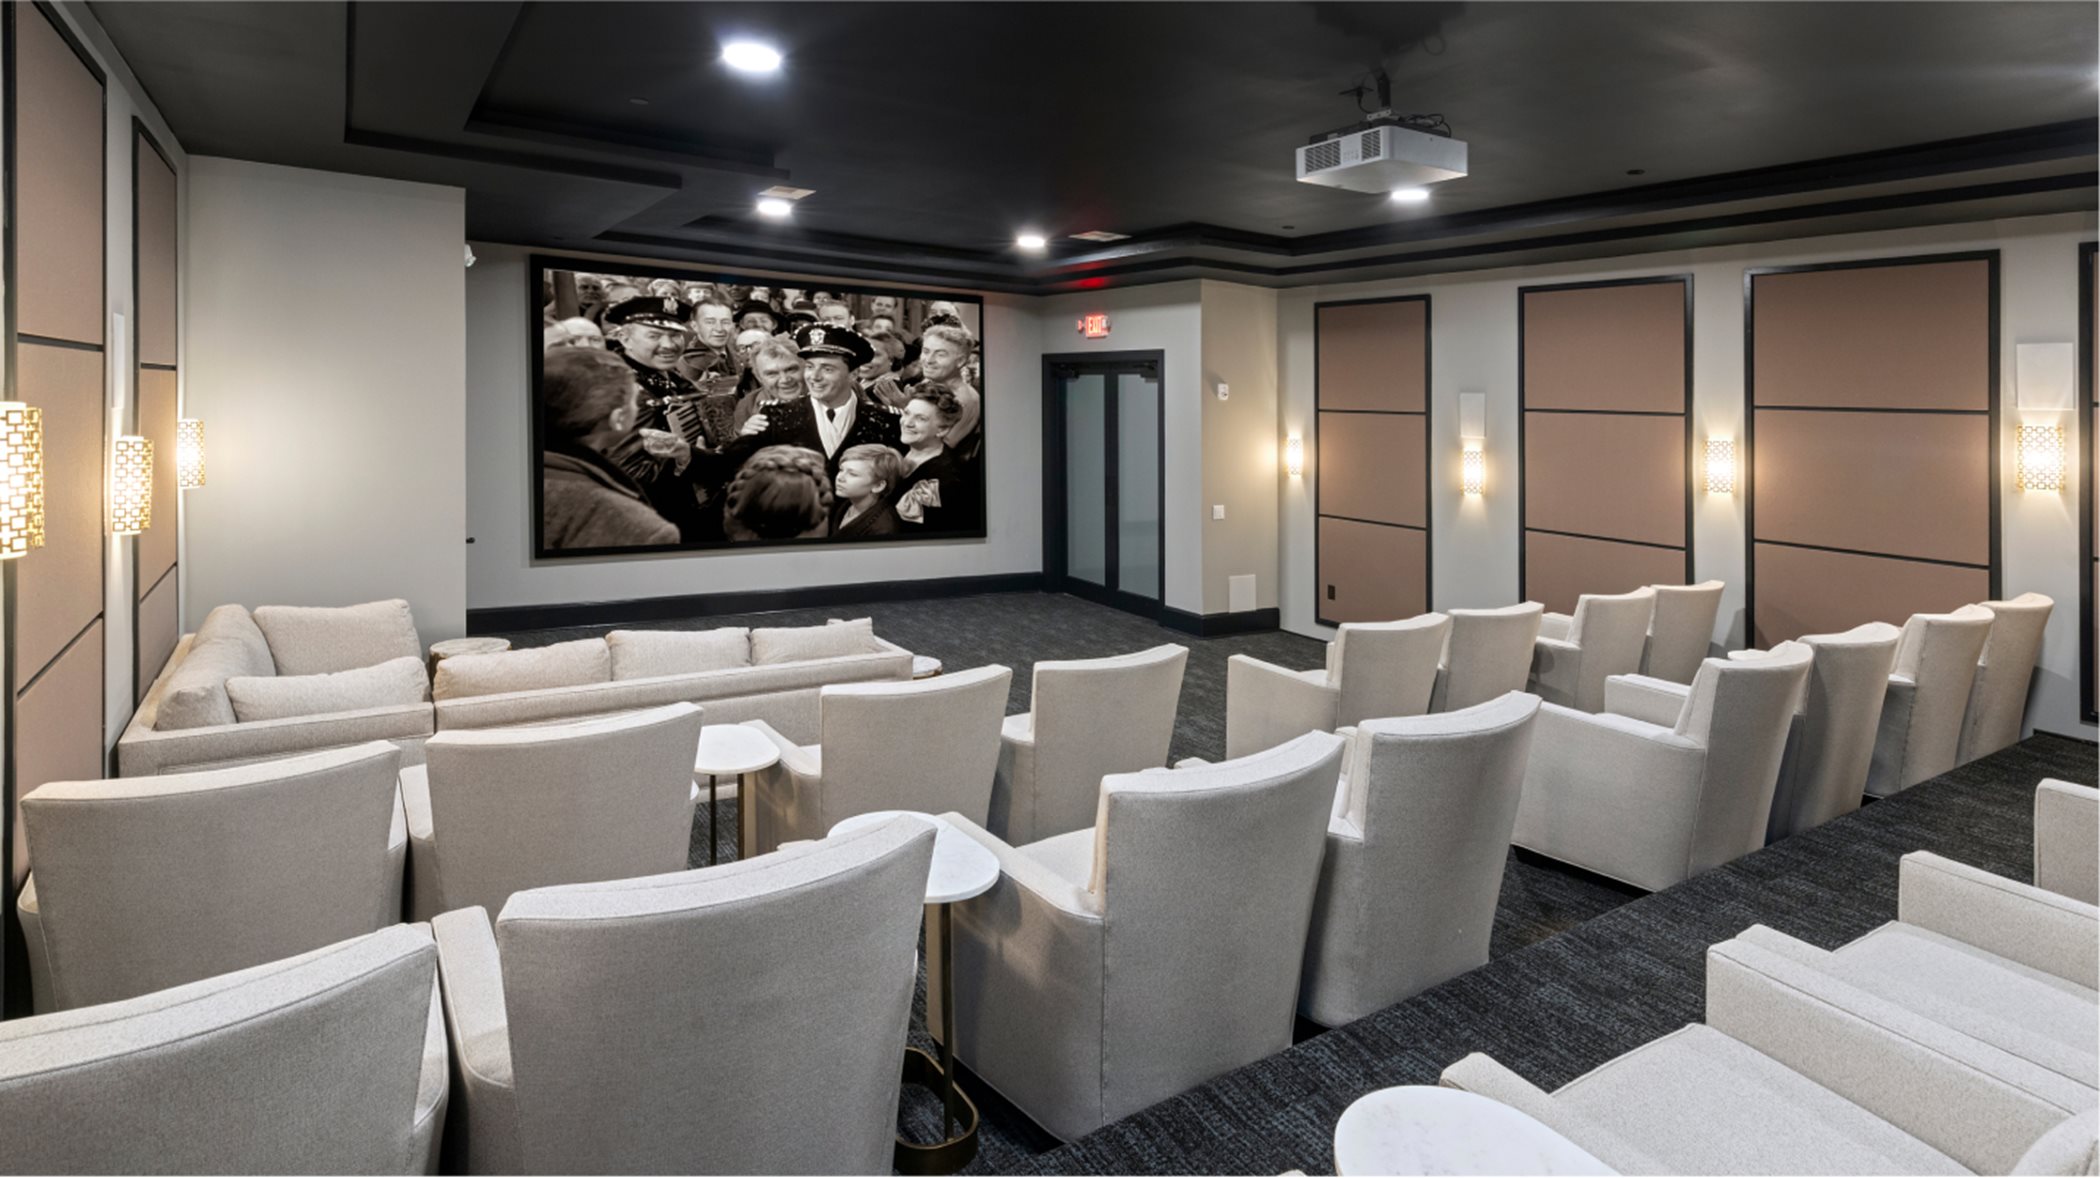 Clubhouse theater room